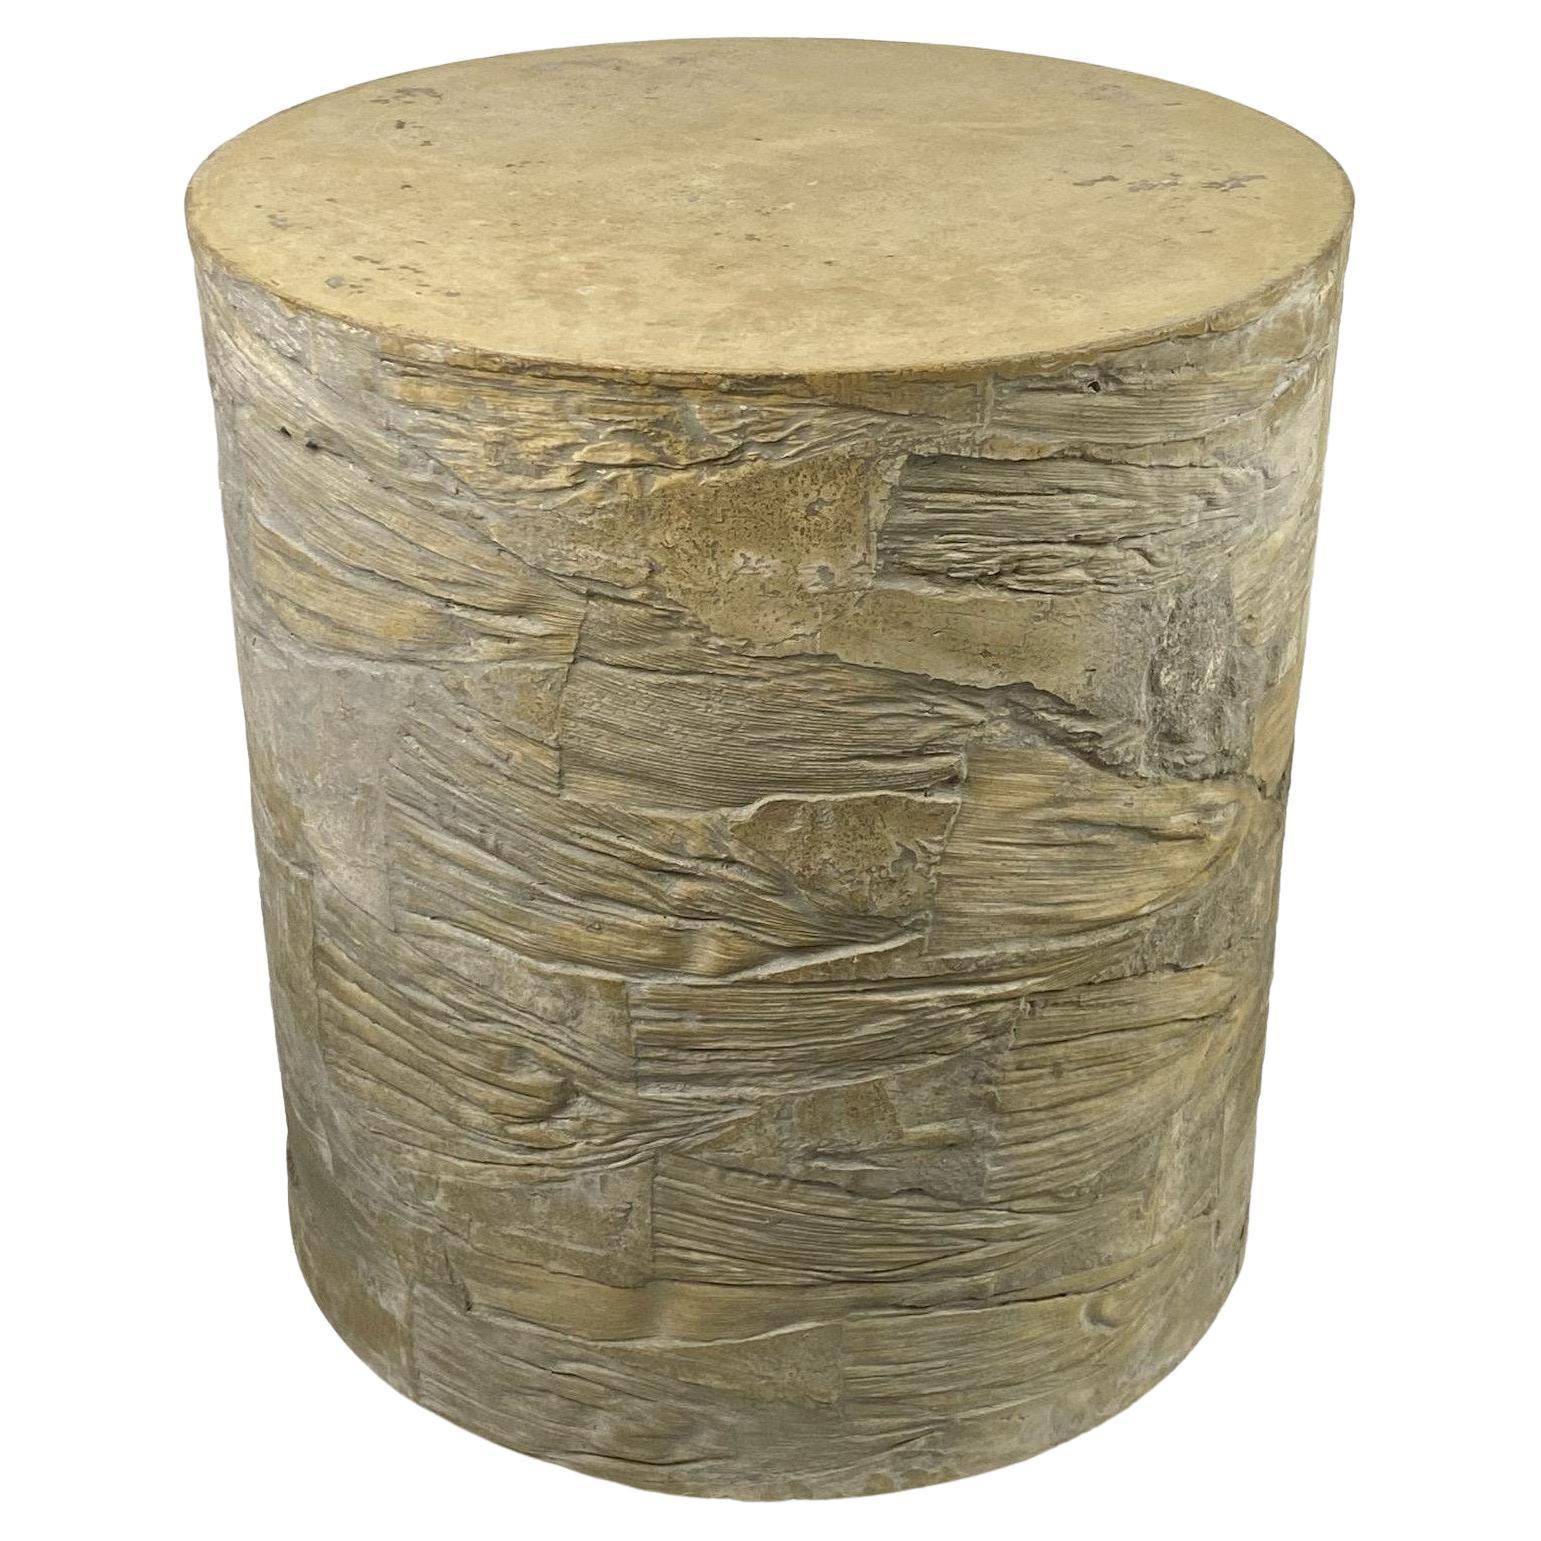 Rustic Yellow Concrete Stool with Textured Corn Husk Imprints, 'Switchback'